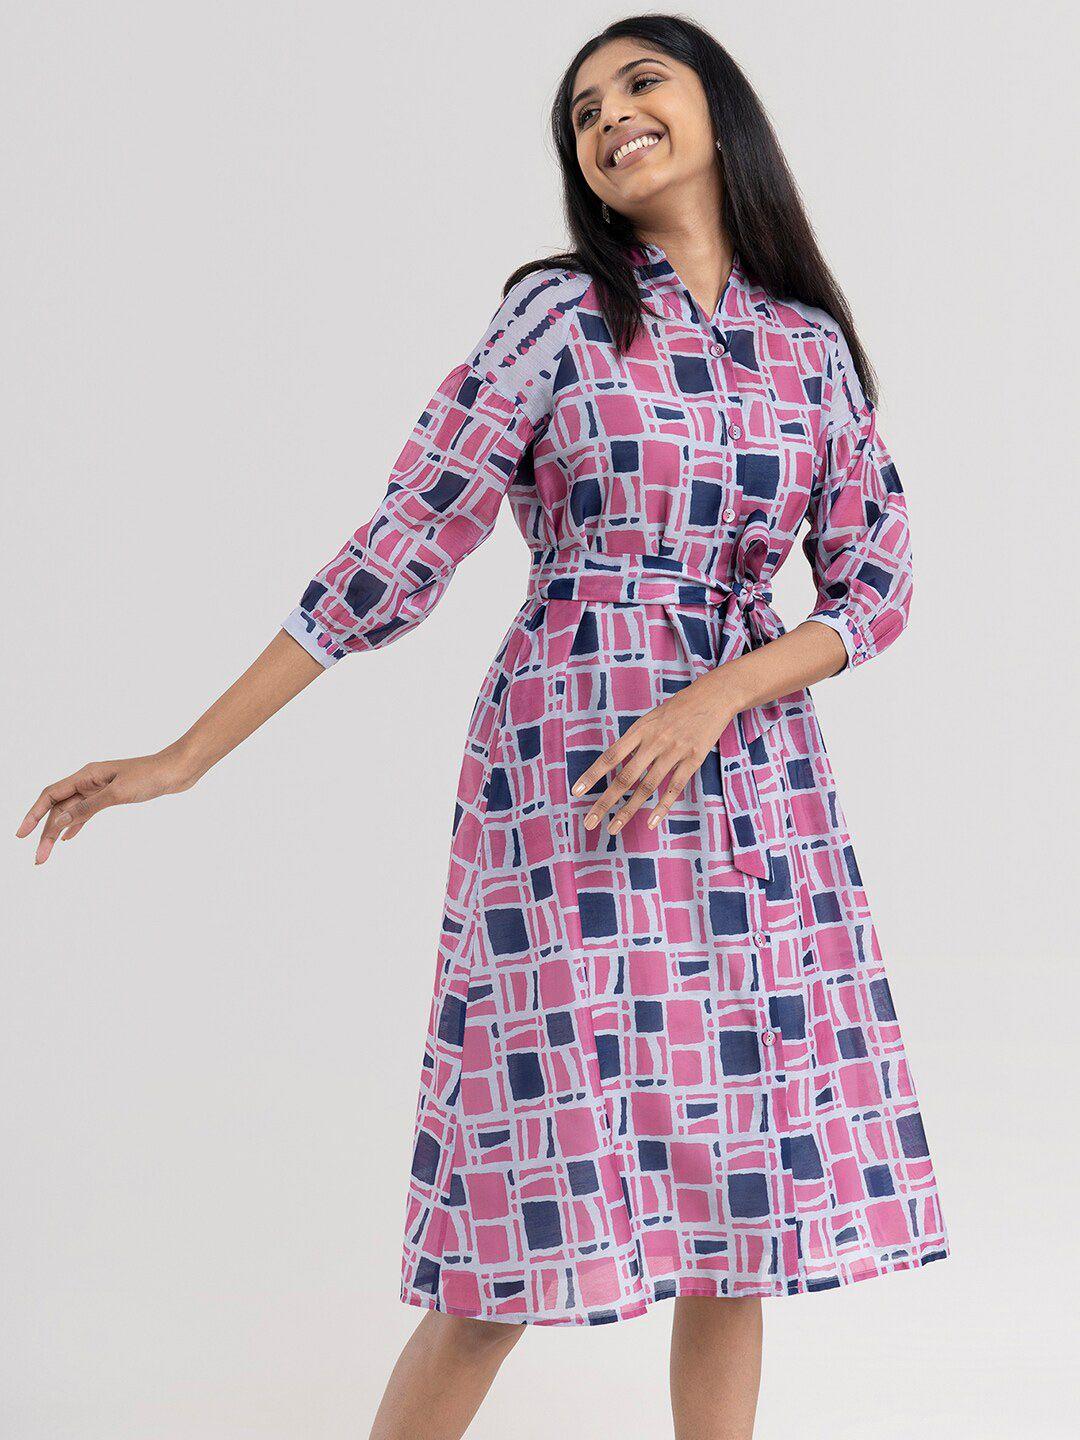 marigold by fablestreet grey & pink abstract printed shirt dress